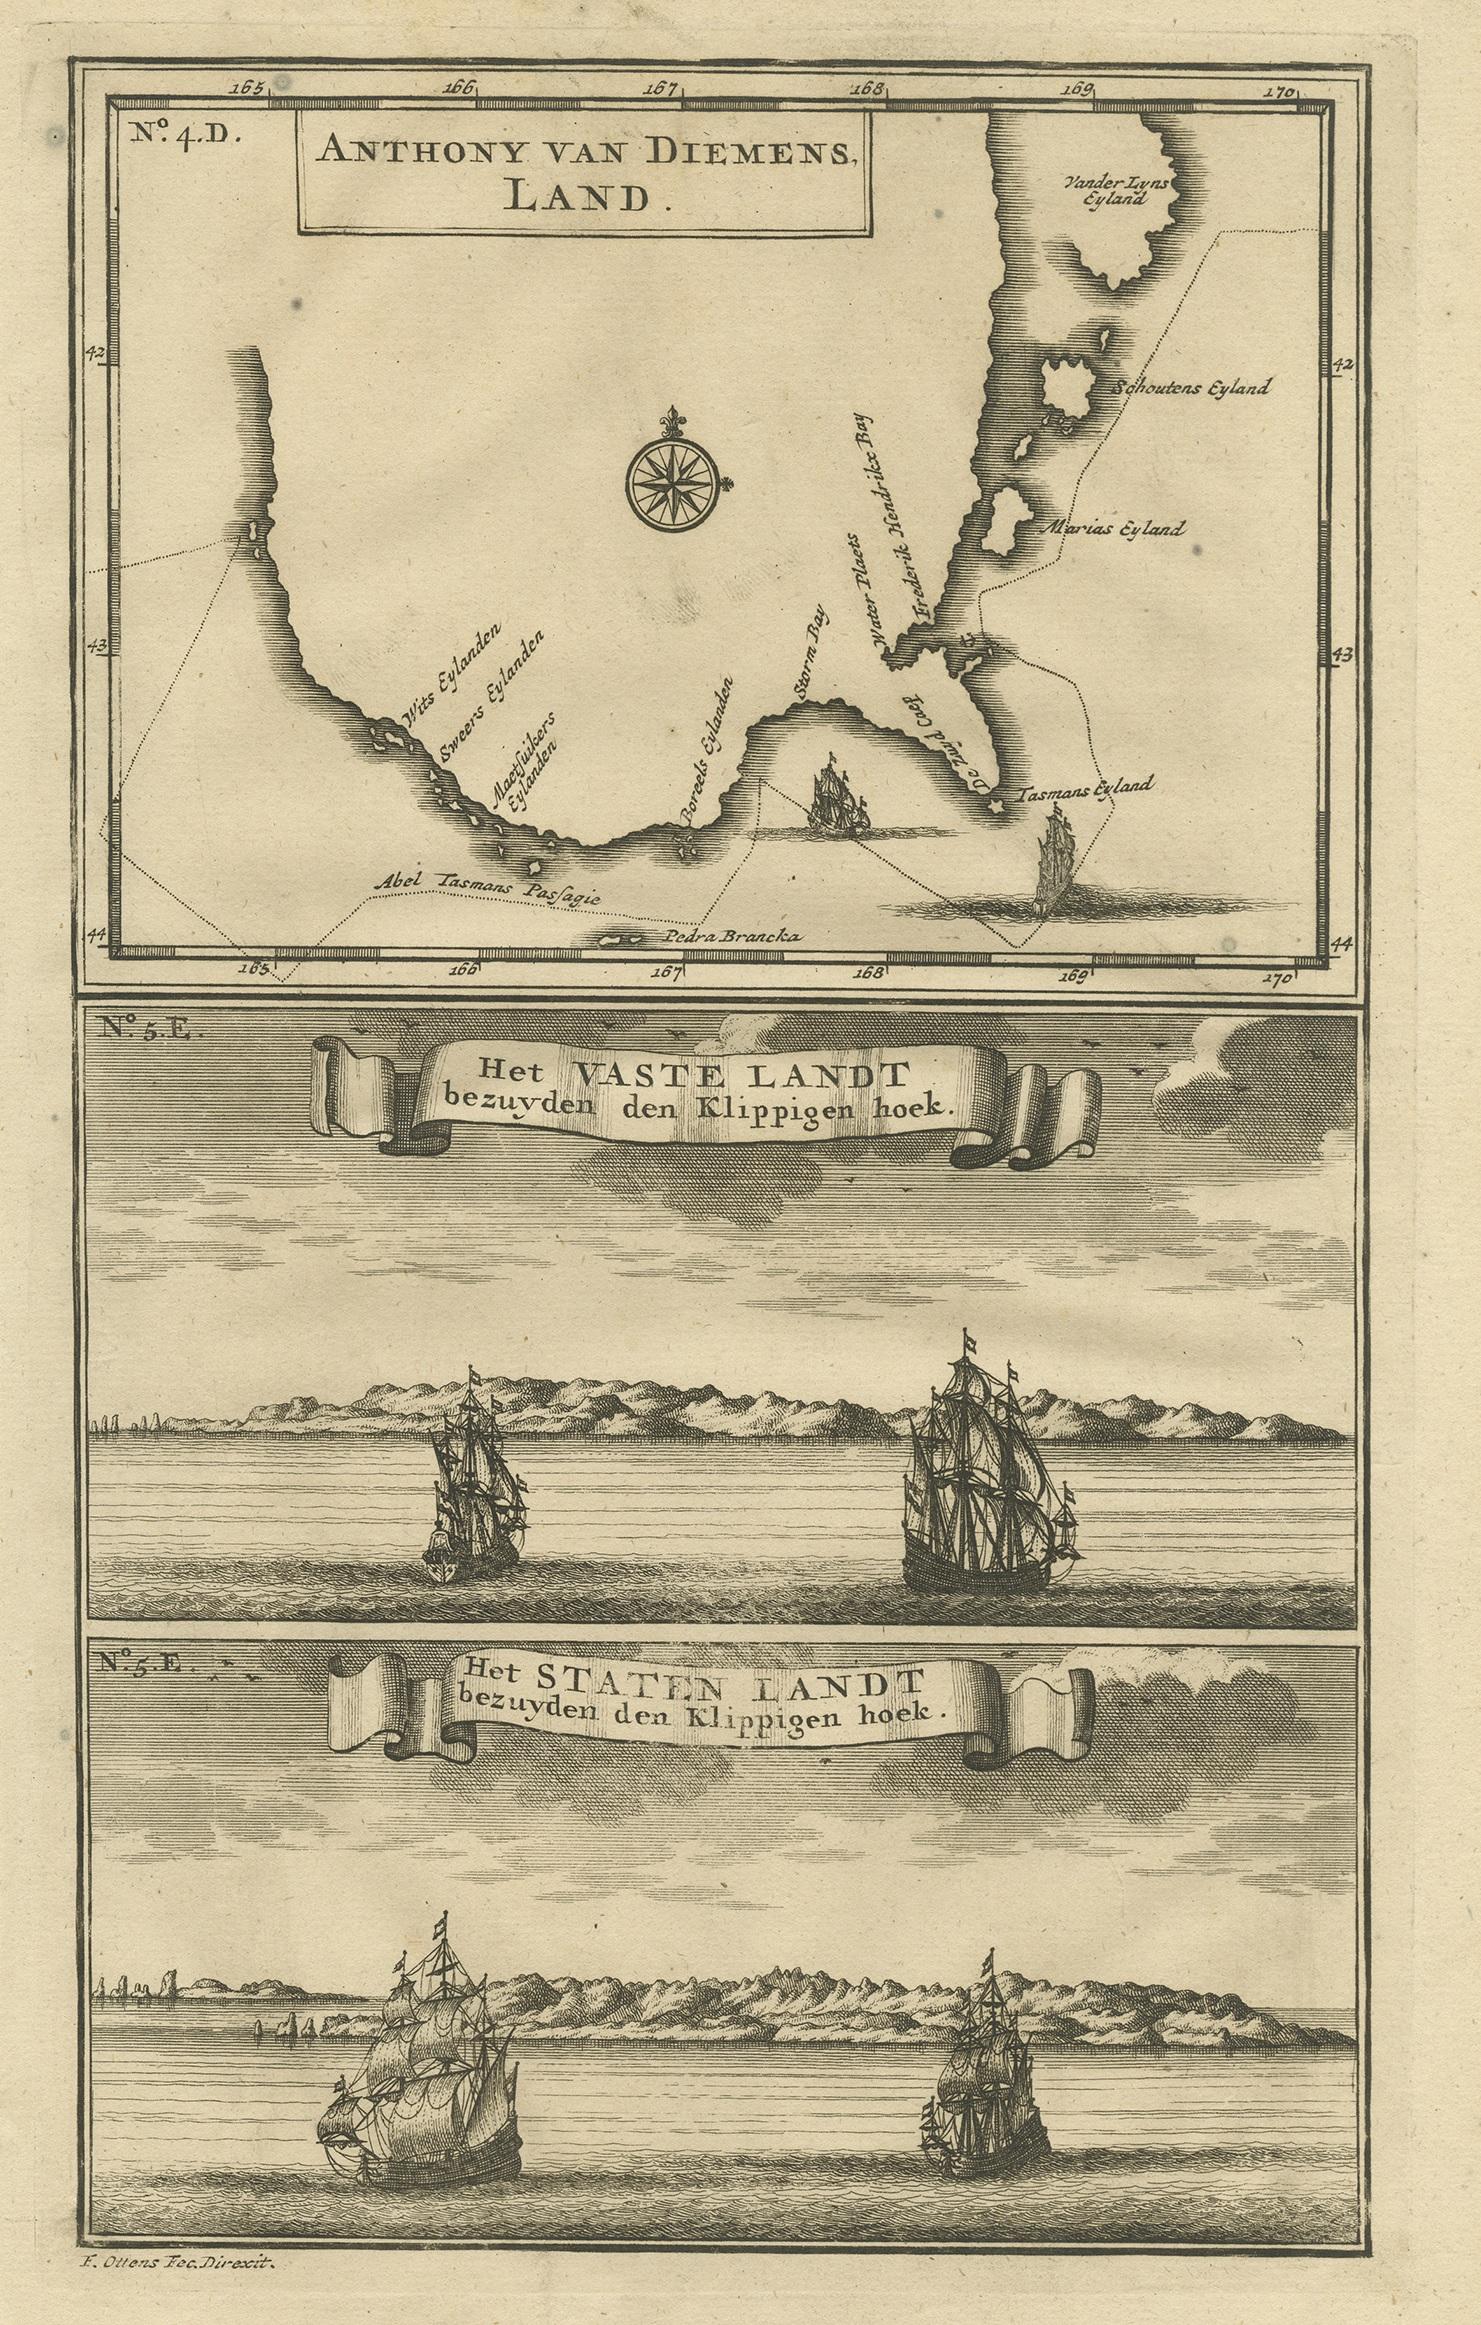 Antique print titled 'Anthony van Diemens Land'. This print depicts a map and two prints of the track of Abel Tasman's epic first voyage of 1642-1643, which resulted in the discovery of Tasmania and New Zealand. This print originates from 'Oud en